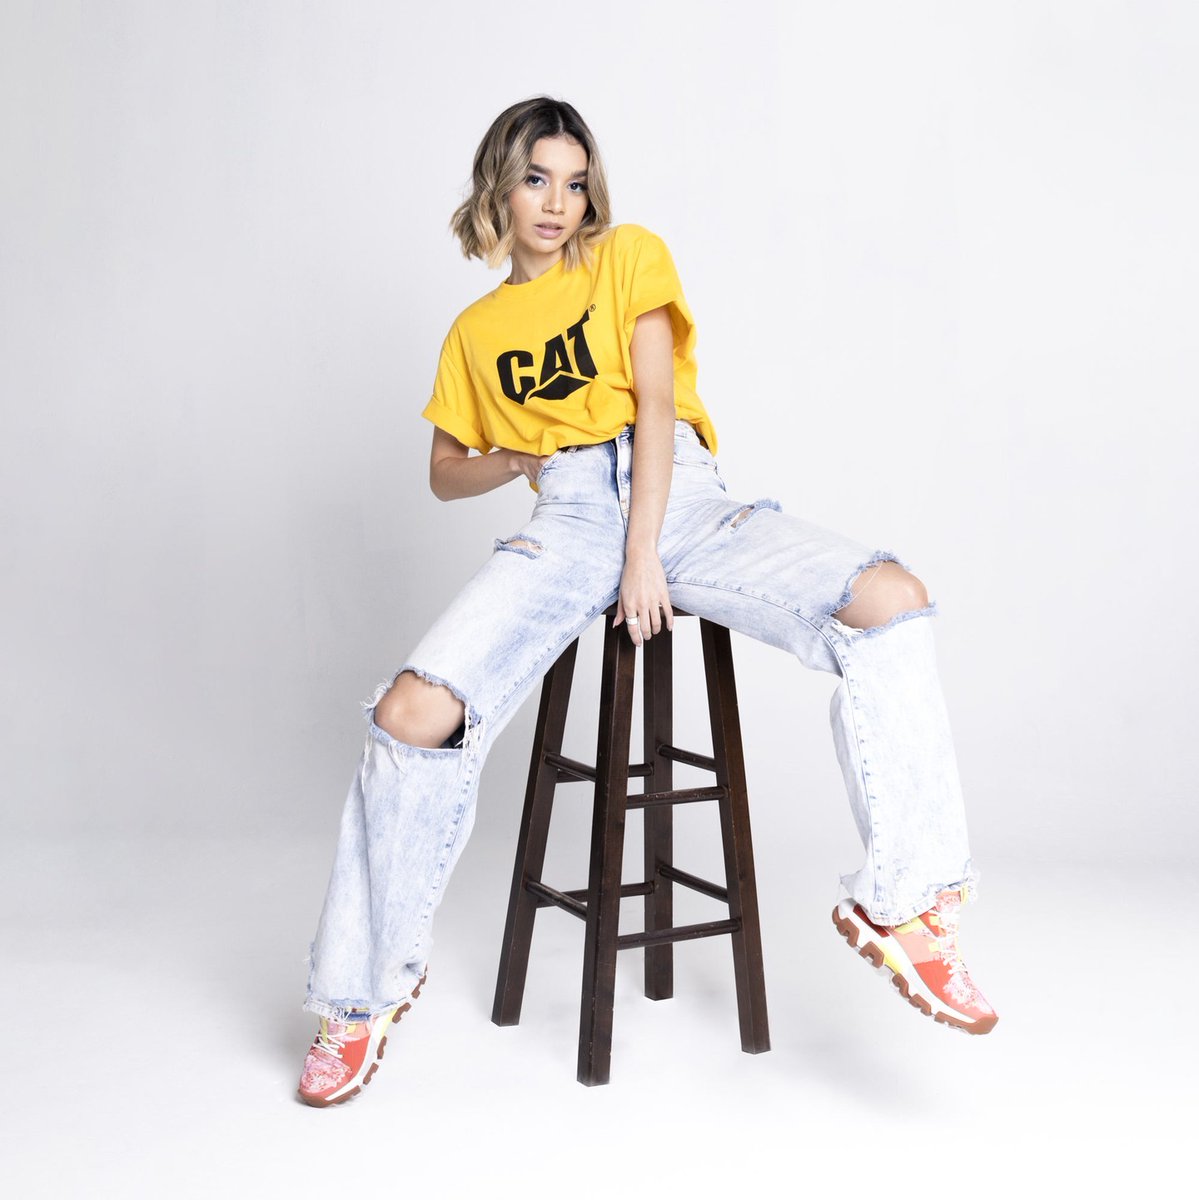 Discover the art of effortless style with Cat Footwear. From footwear to apparel, our collection adds the finishing touch to any outfit. #catfootwearsa #footwear #shoes #workshoes #fashion #fashionshoes #streetstyle #caterpillar #apparel #catapparel